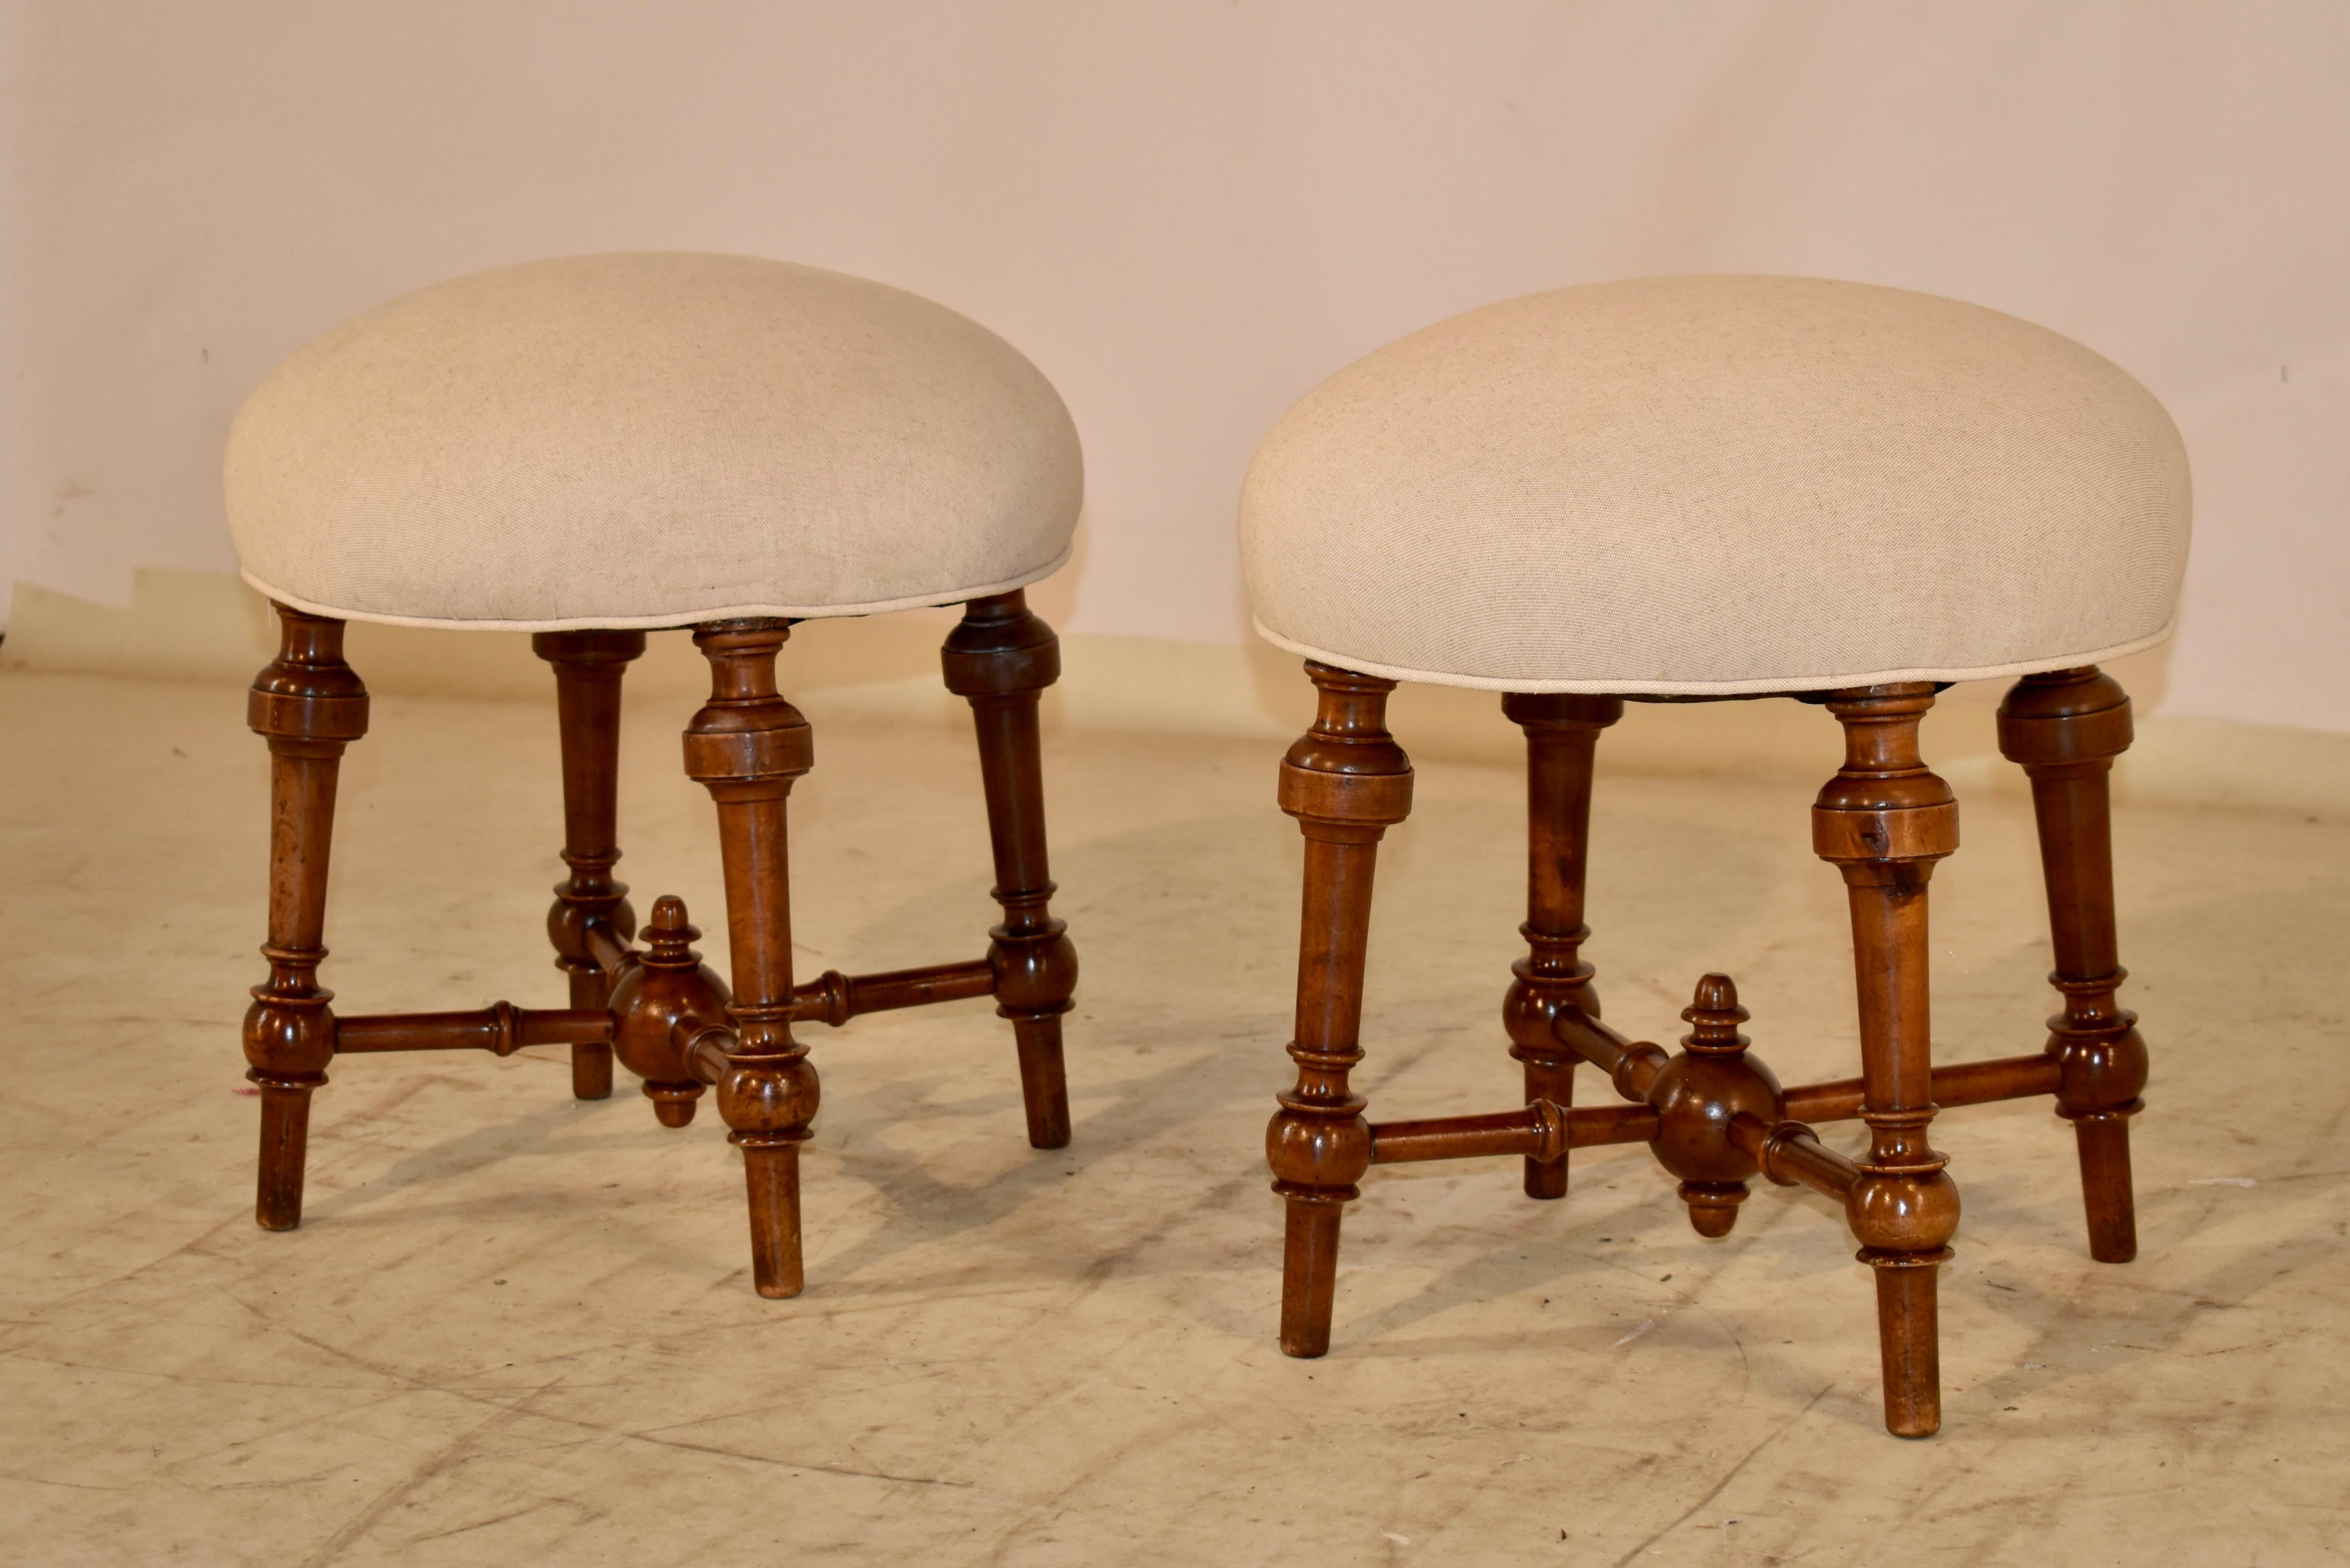 Pair of 19th century walnut stools from France. The seats have been newly upholstered in linen and finished with single welt decoration. The seats are round and are sitting on top of a solid walnut frame with splayed and hand turned walnut legs. The